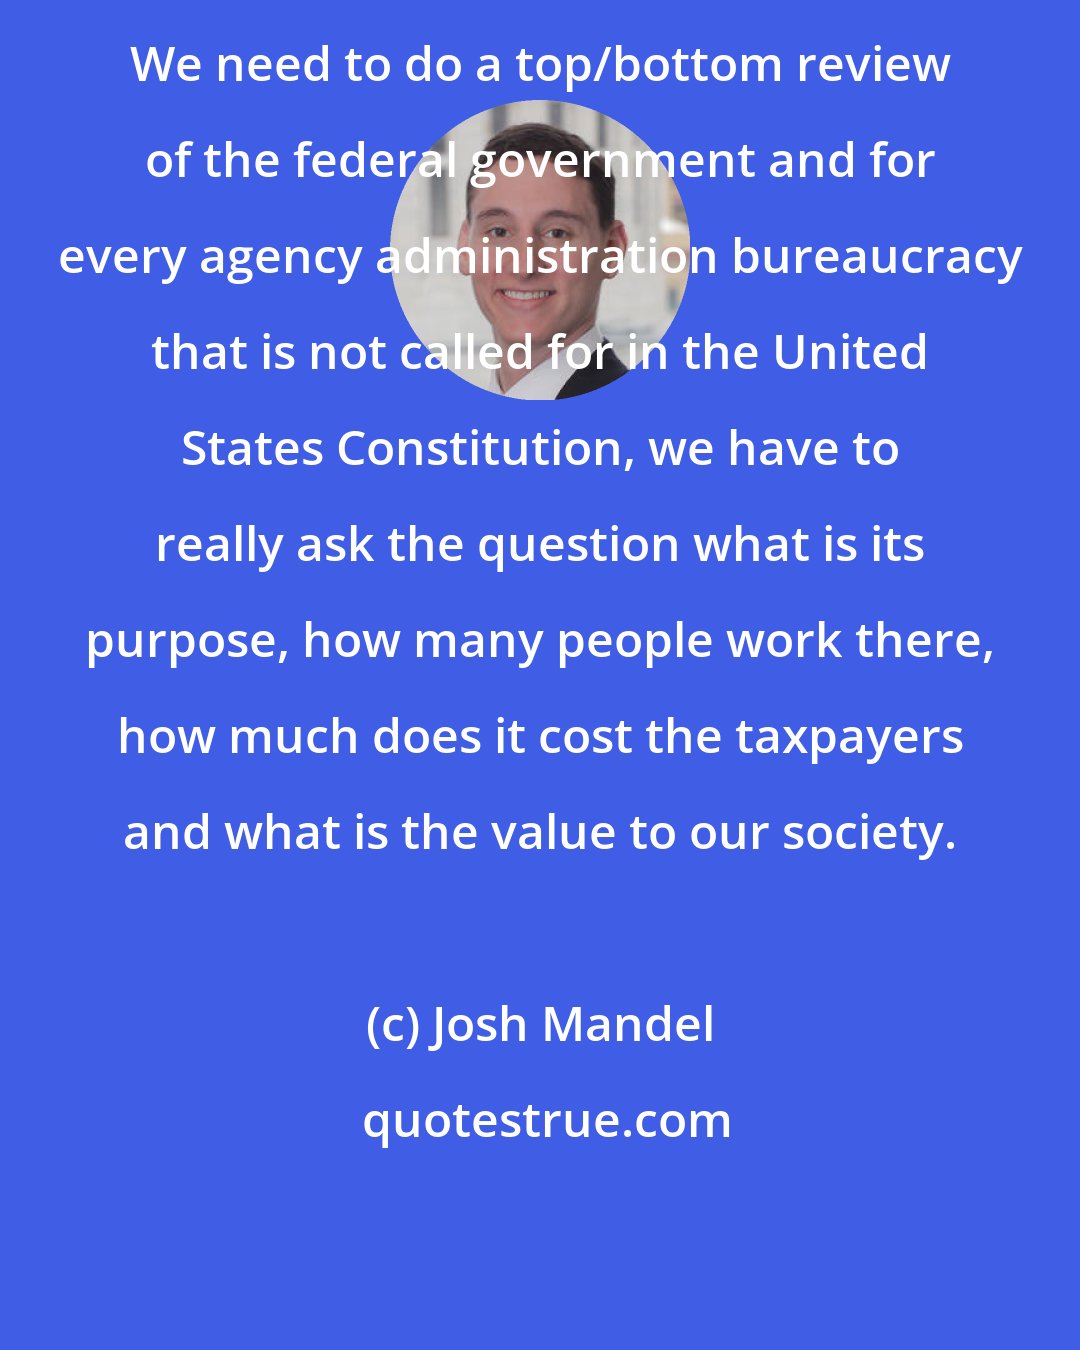 Josh Mandel: We need to do a top/bottom review of the federal government and for every agency administration bureaucracy that is not called for in the United States Constitution, we have to really ask the question what is its purpose, how many people work there, how much does it cost the taxpayers and what is the value to our society.